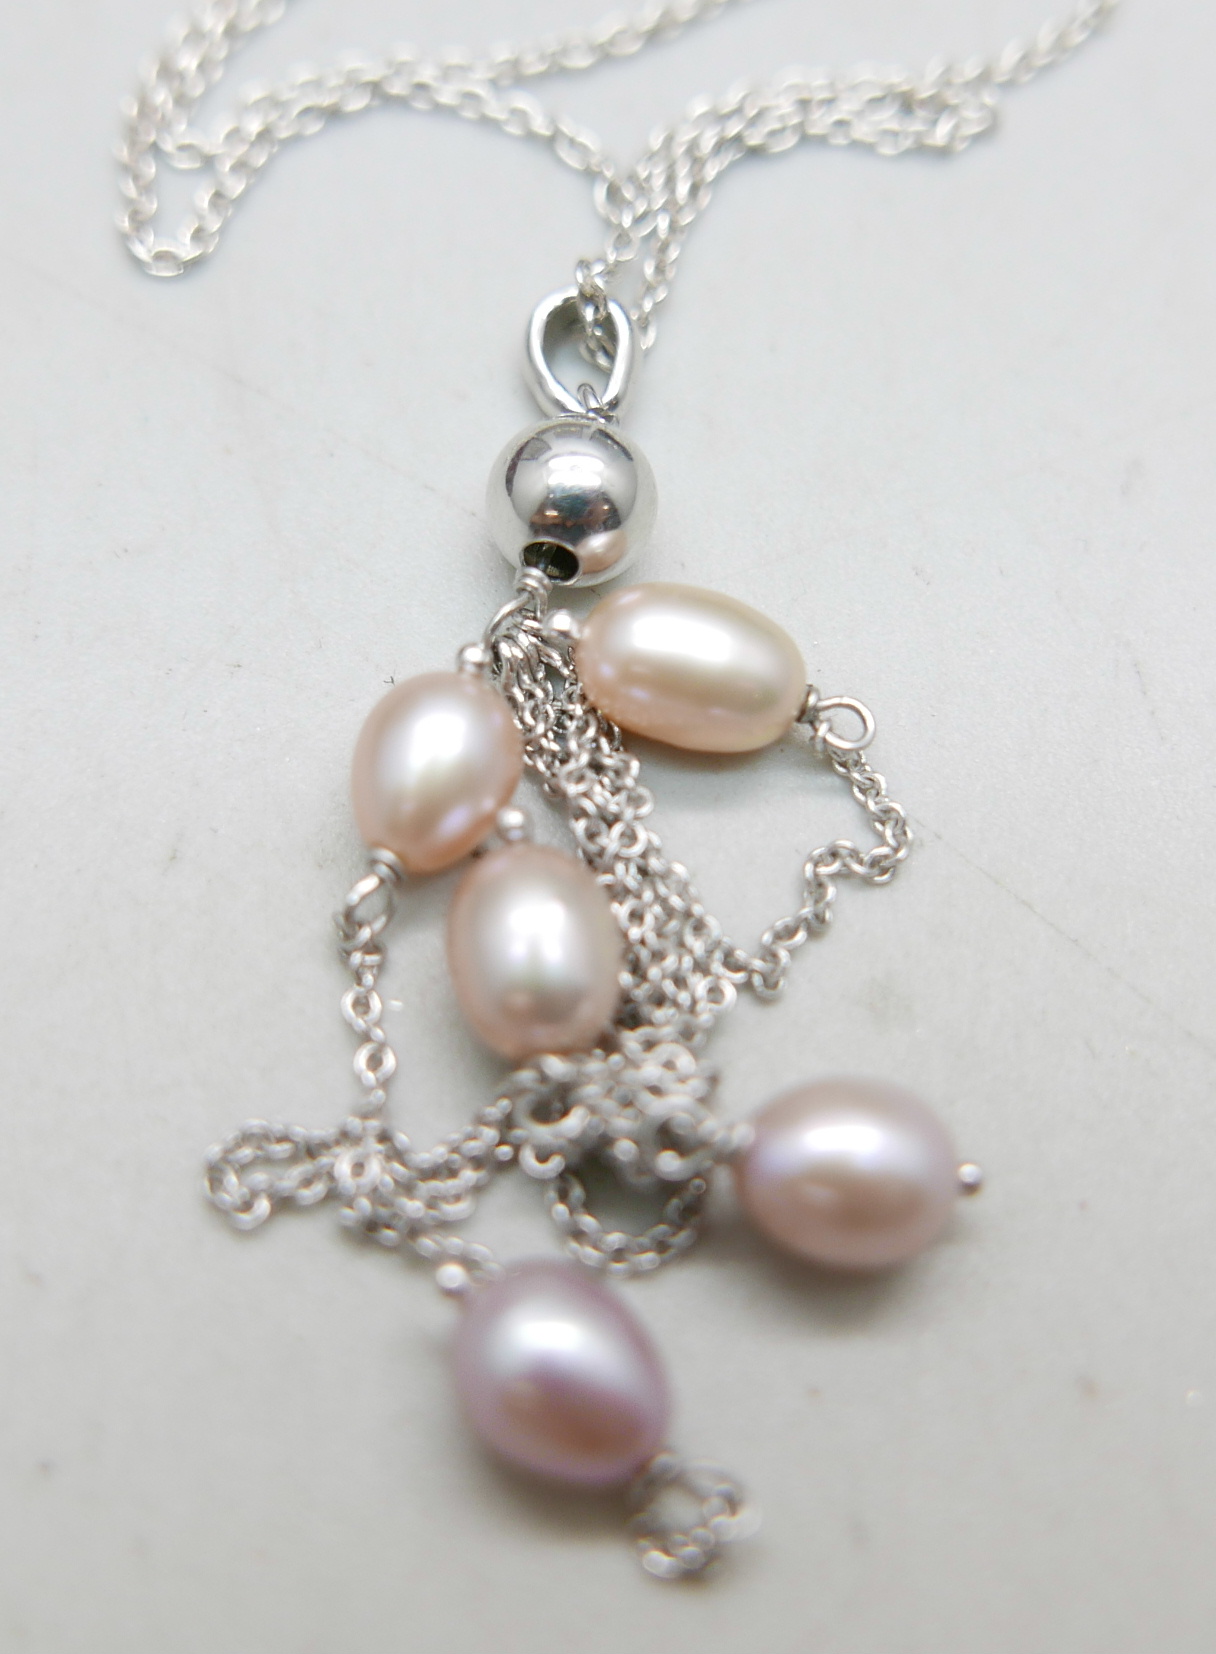 Two silver and cultured pearl necklaces and two pairs of cultured pearl earrings - Image 3 of 3